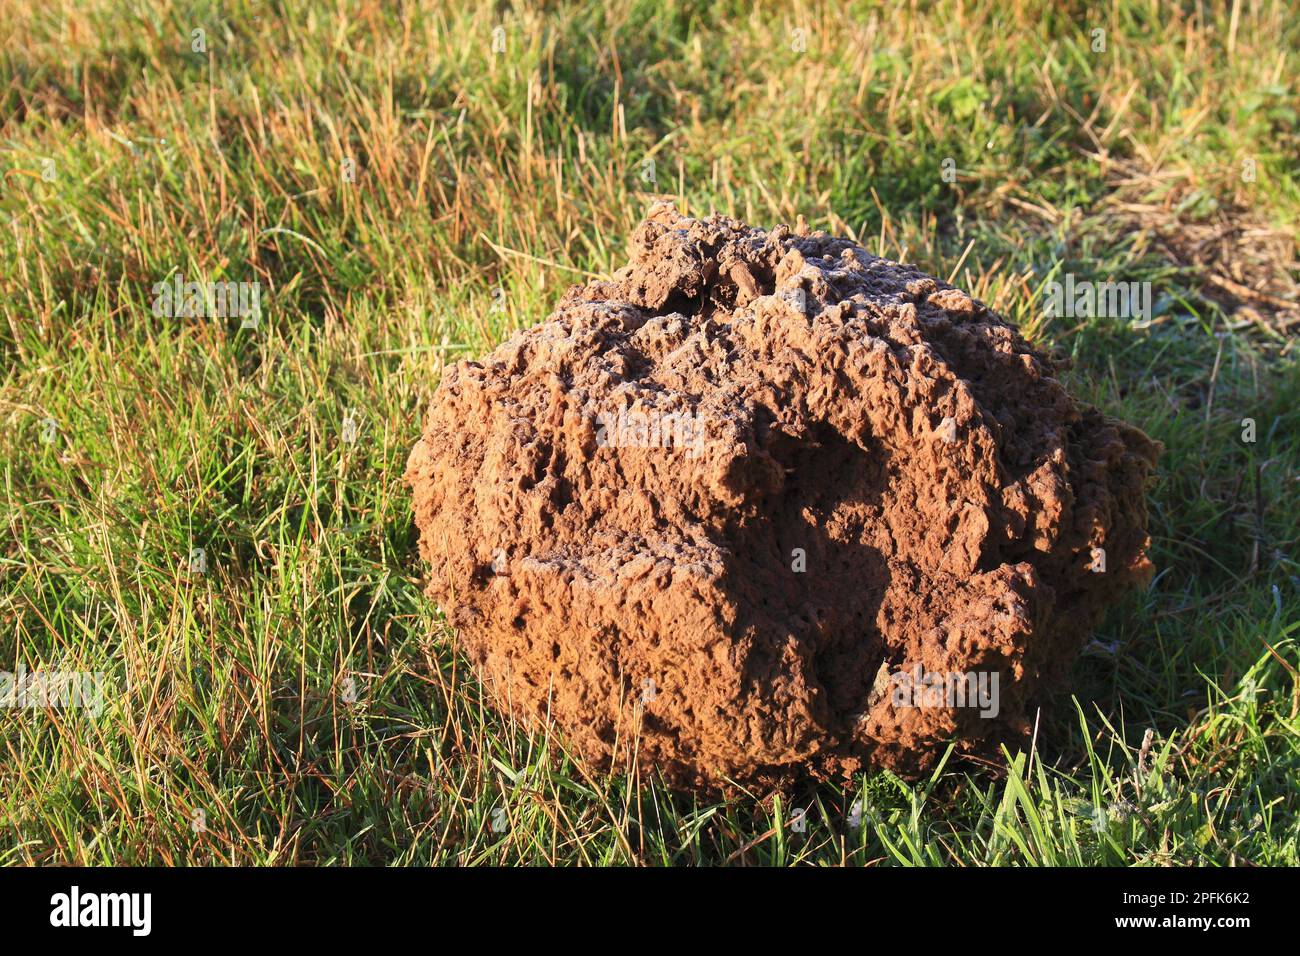 Giant giant puffball (Langermannia gigantea) mature fruiting body, growing on rough pasture and acid grassland, Little Ouse Headwaters Project, The Stock Photo